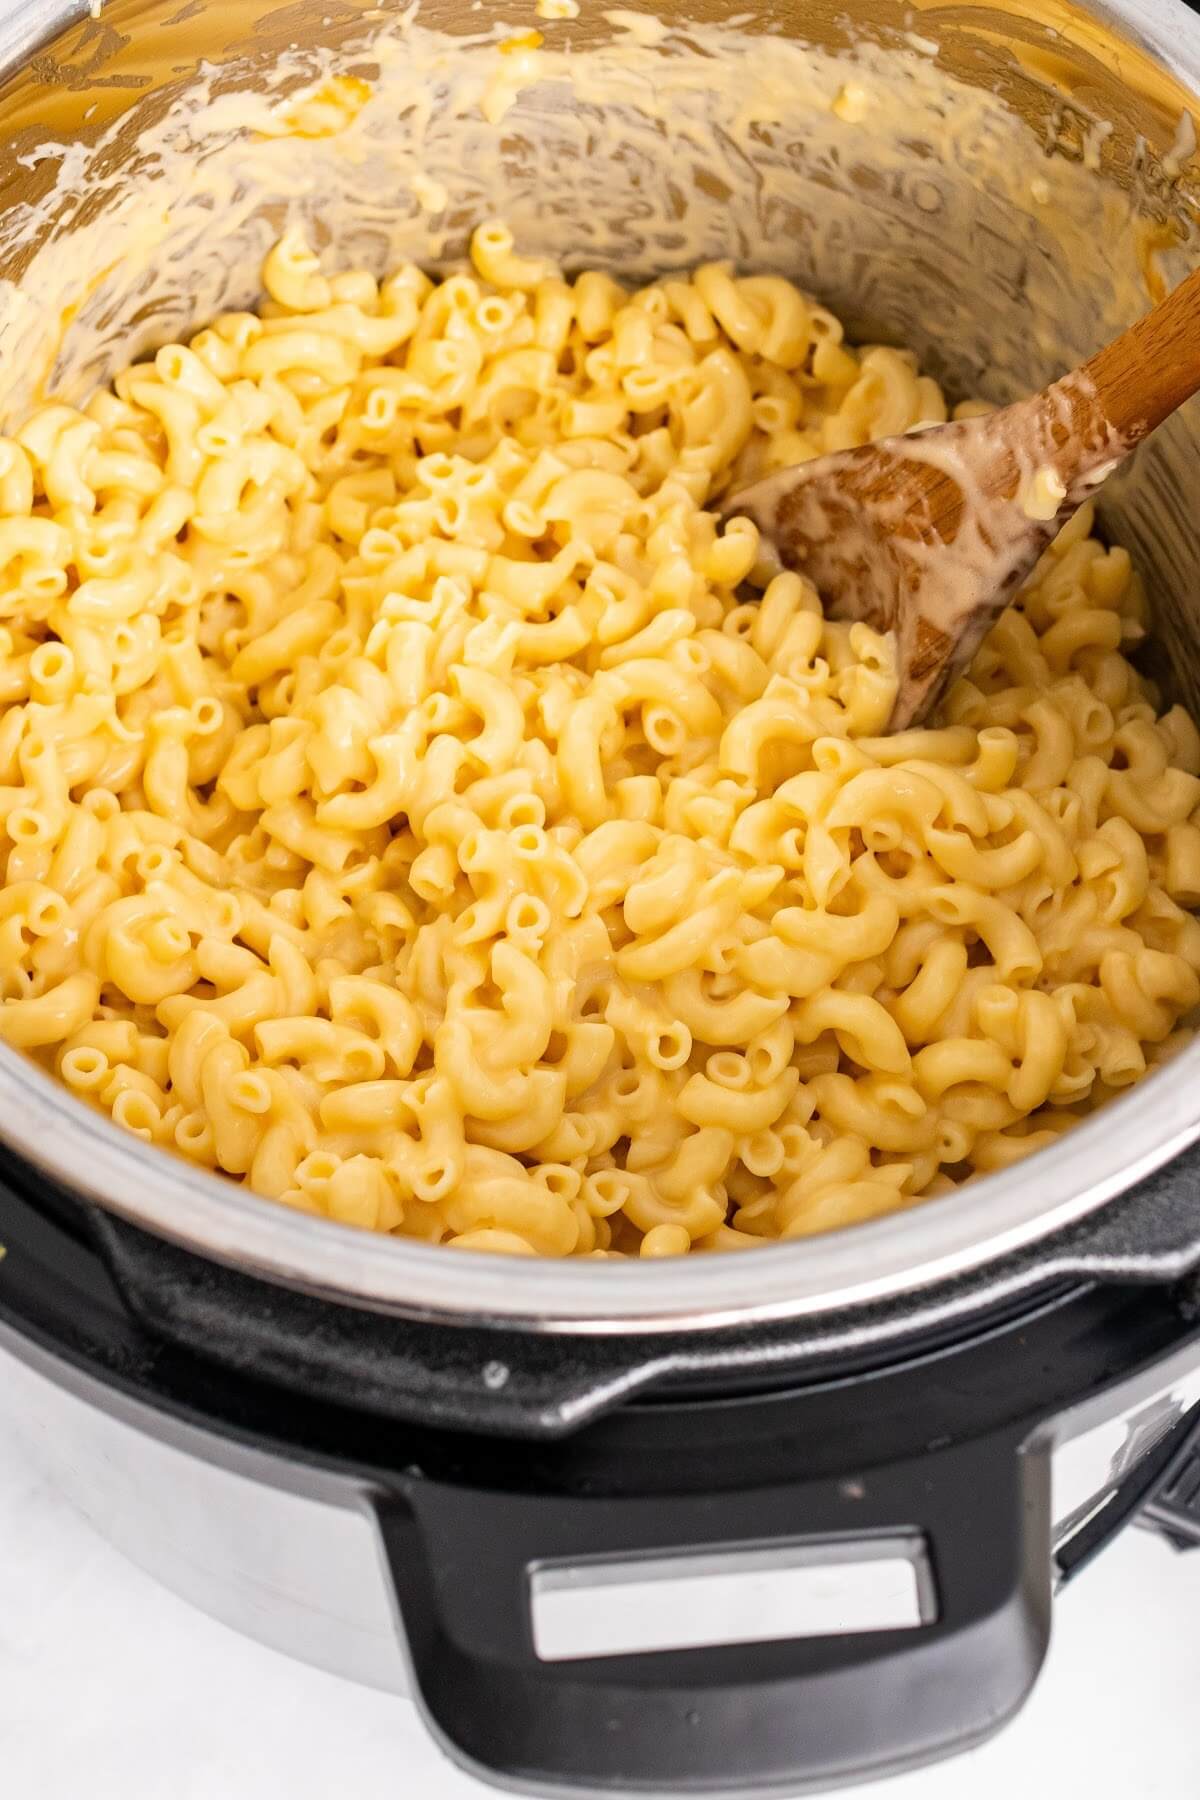 An Instant Pot filled with cooked macaroni and cheese being stirred by a wooden spoon.